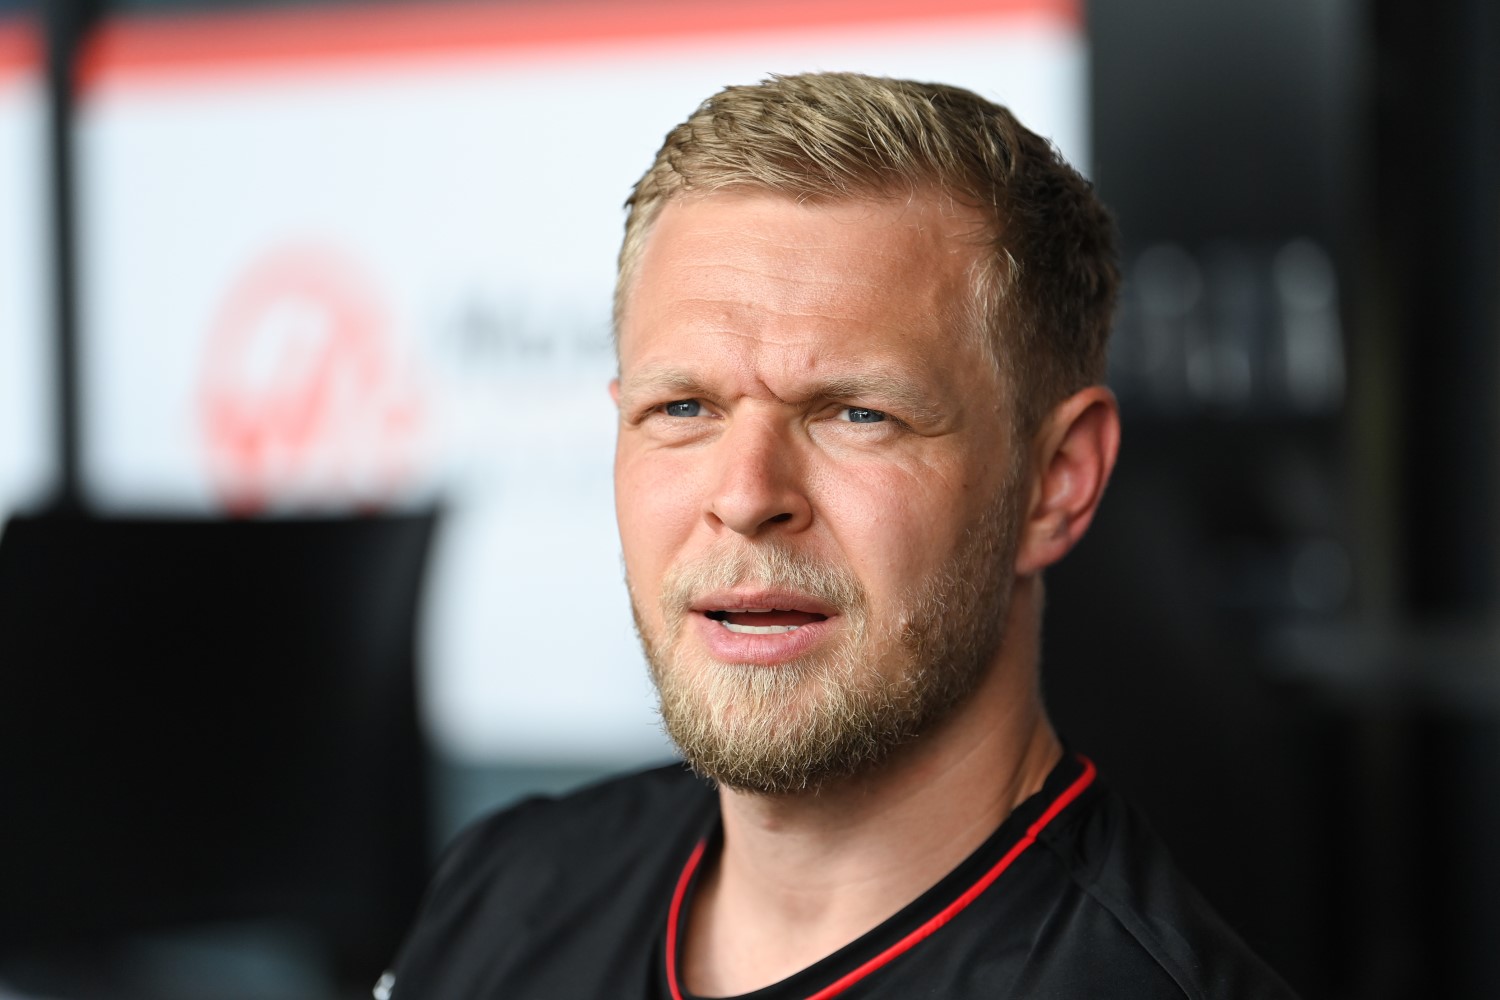 Kevin Magnussen, Haas F1 Team, talks to the press during the Saudi Arabian GP at Jeddah Street Circuit on Wednesday March 06, 2024 in Jeddah, Saudi Arabia. (Photo by Mark Sutton / LAT Images for Haas F1)